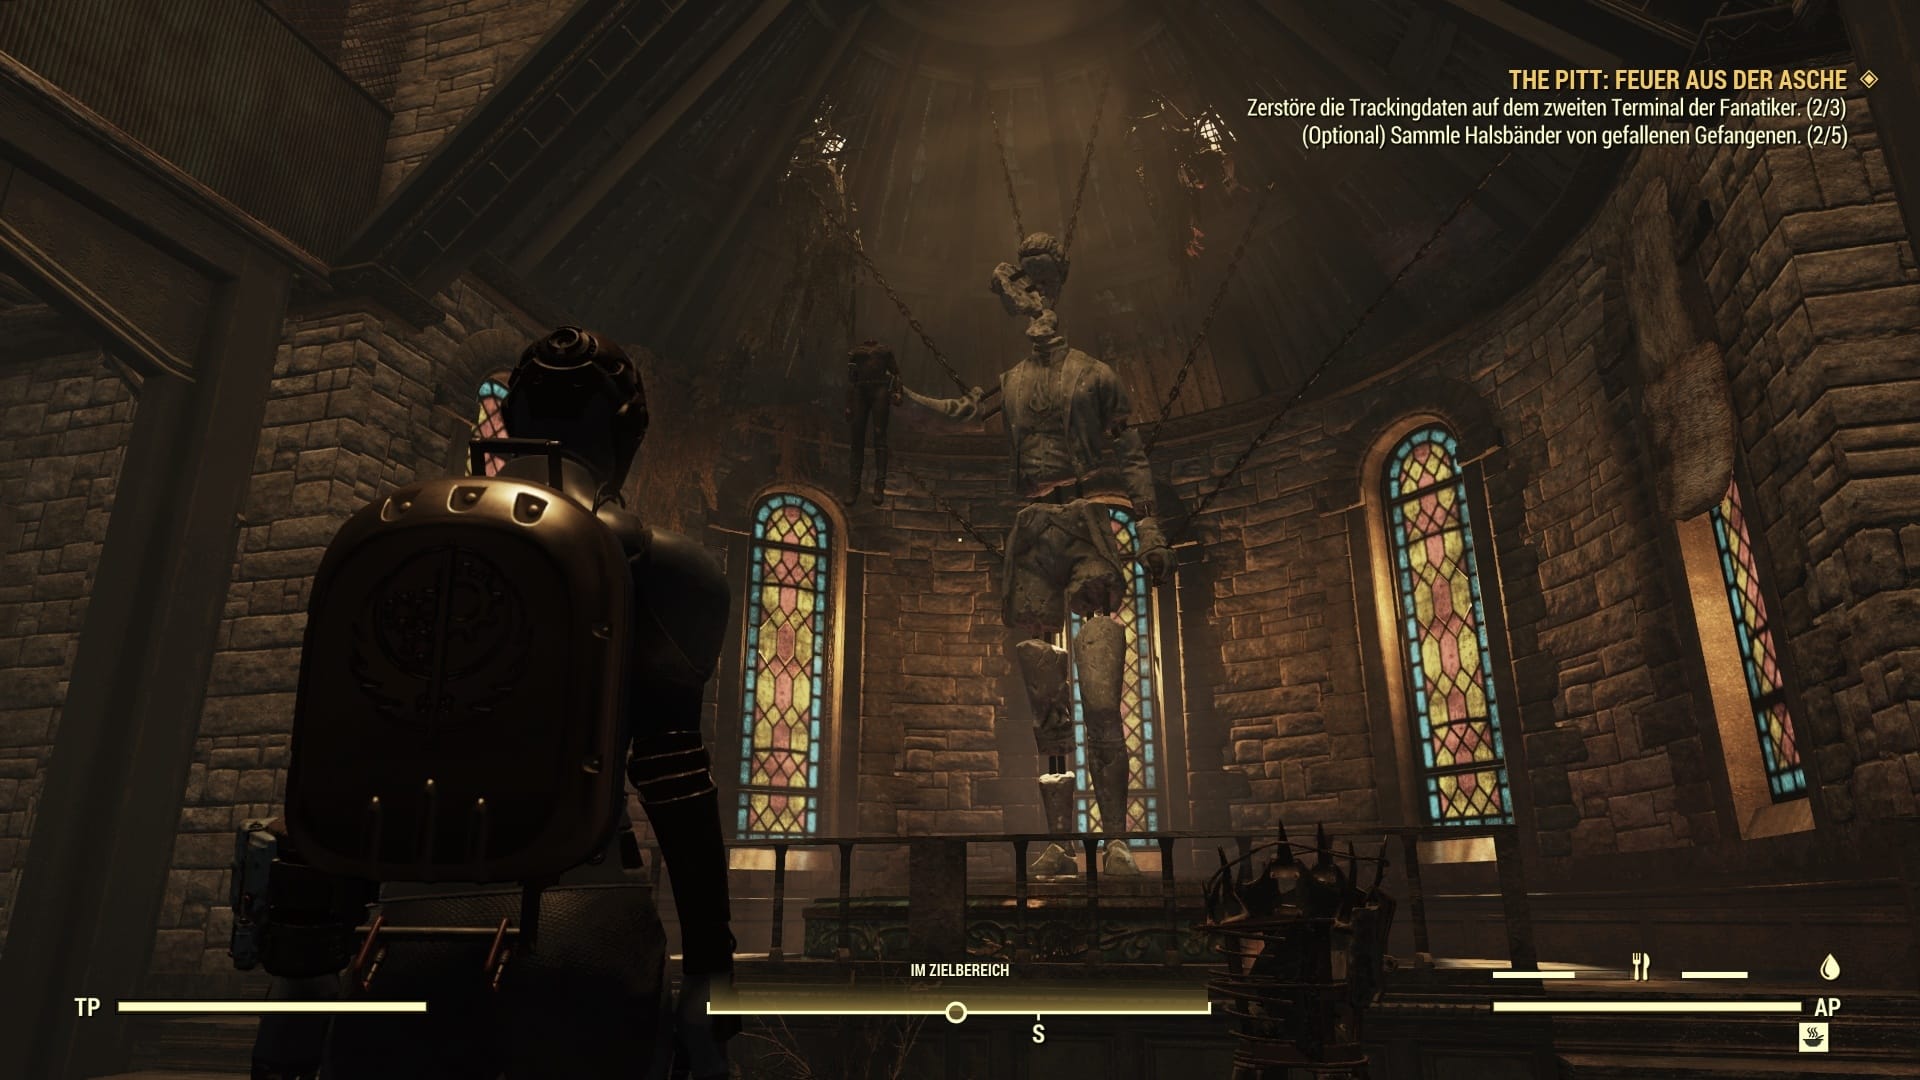 (The fanatics'' stronghold called Sanctuary is a former cathedral that has been darkly converted.)